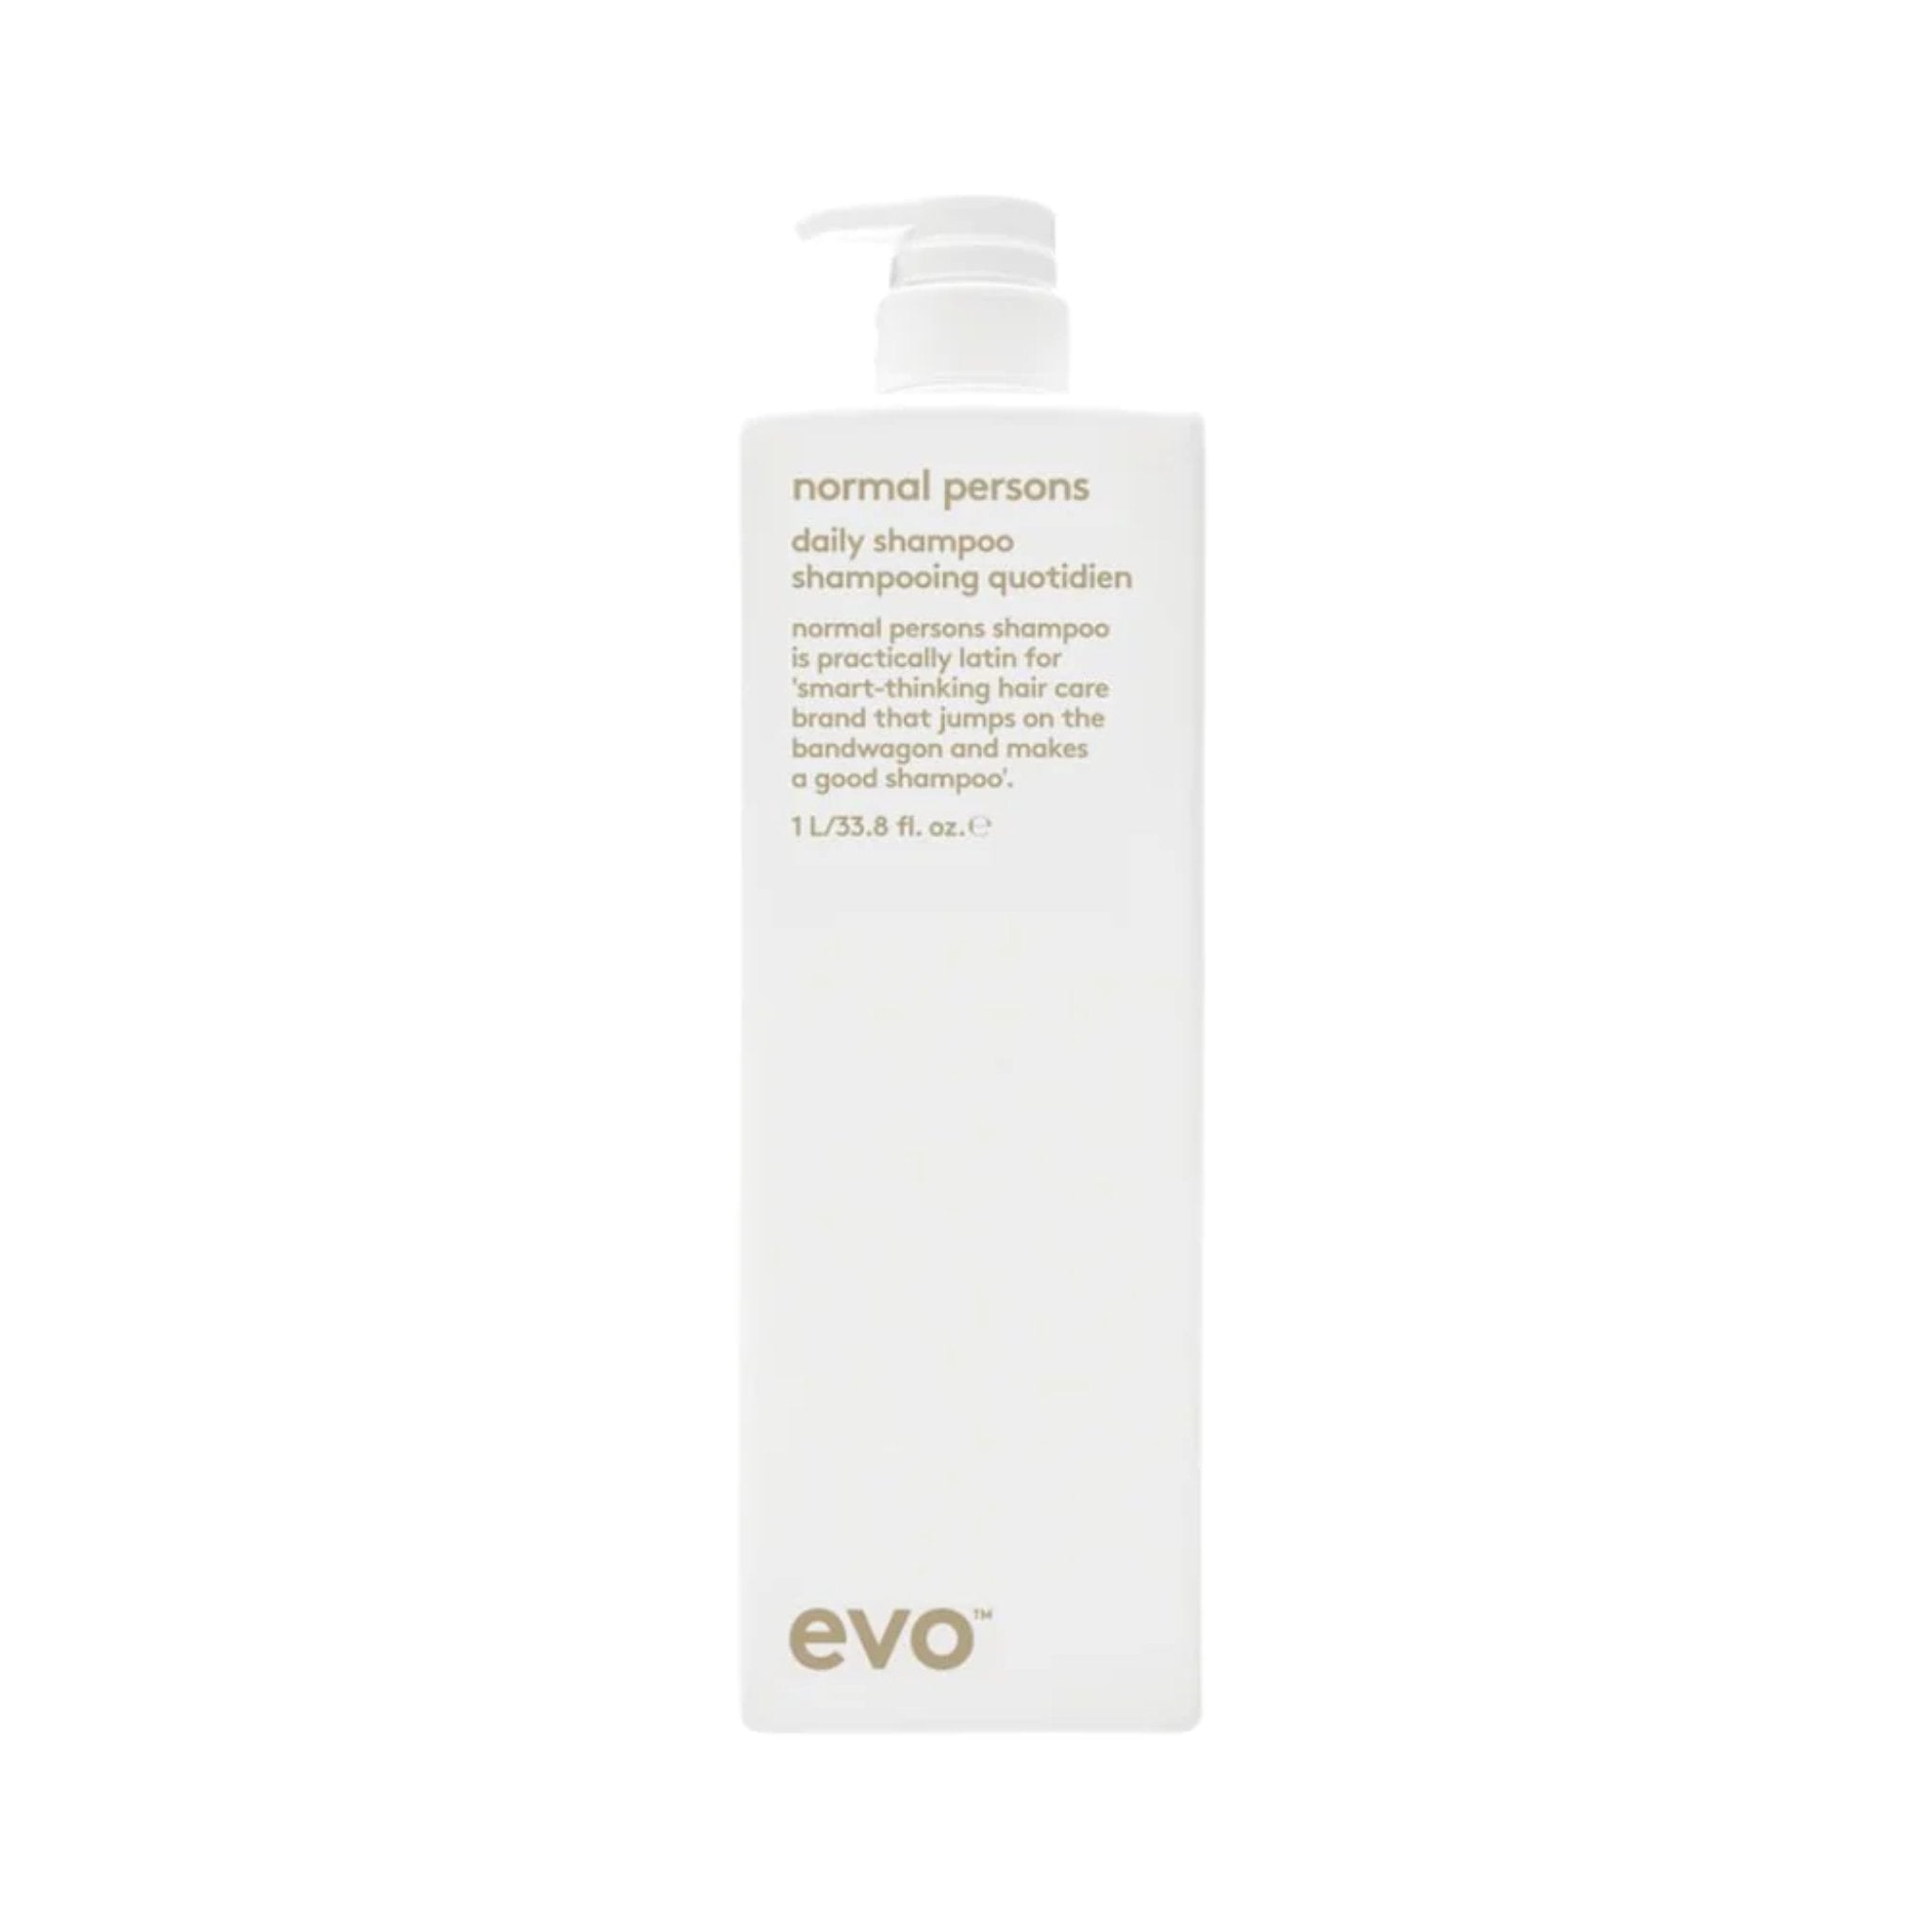 Evo. Normal Persons Shampoing Quotidien - 1000 ml - Concept C. Shop